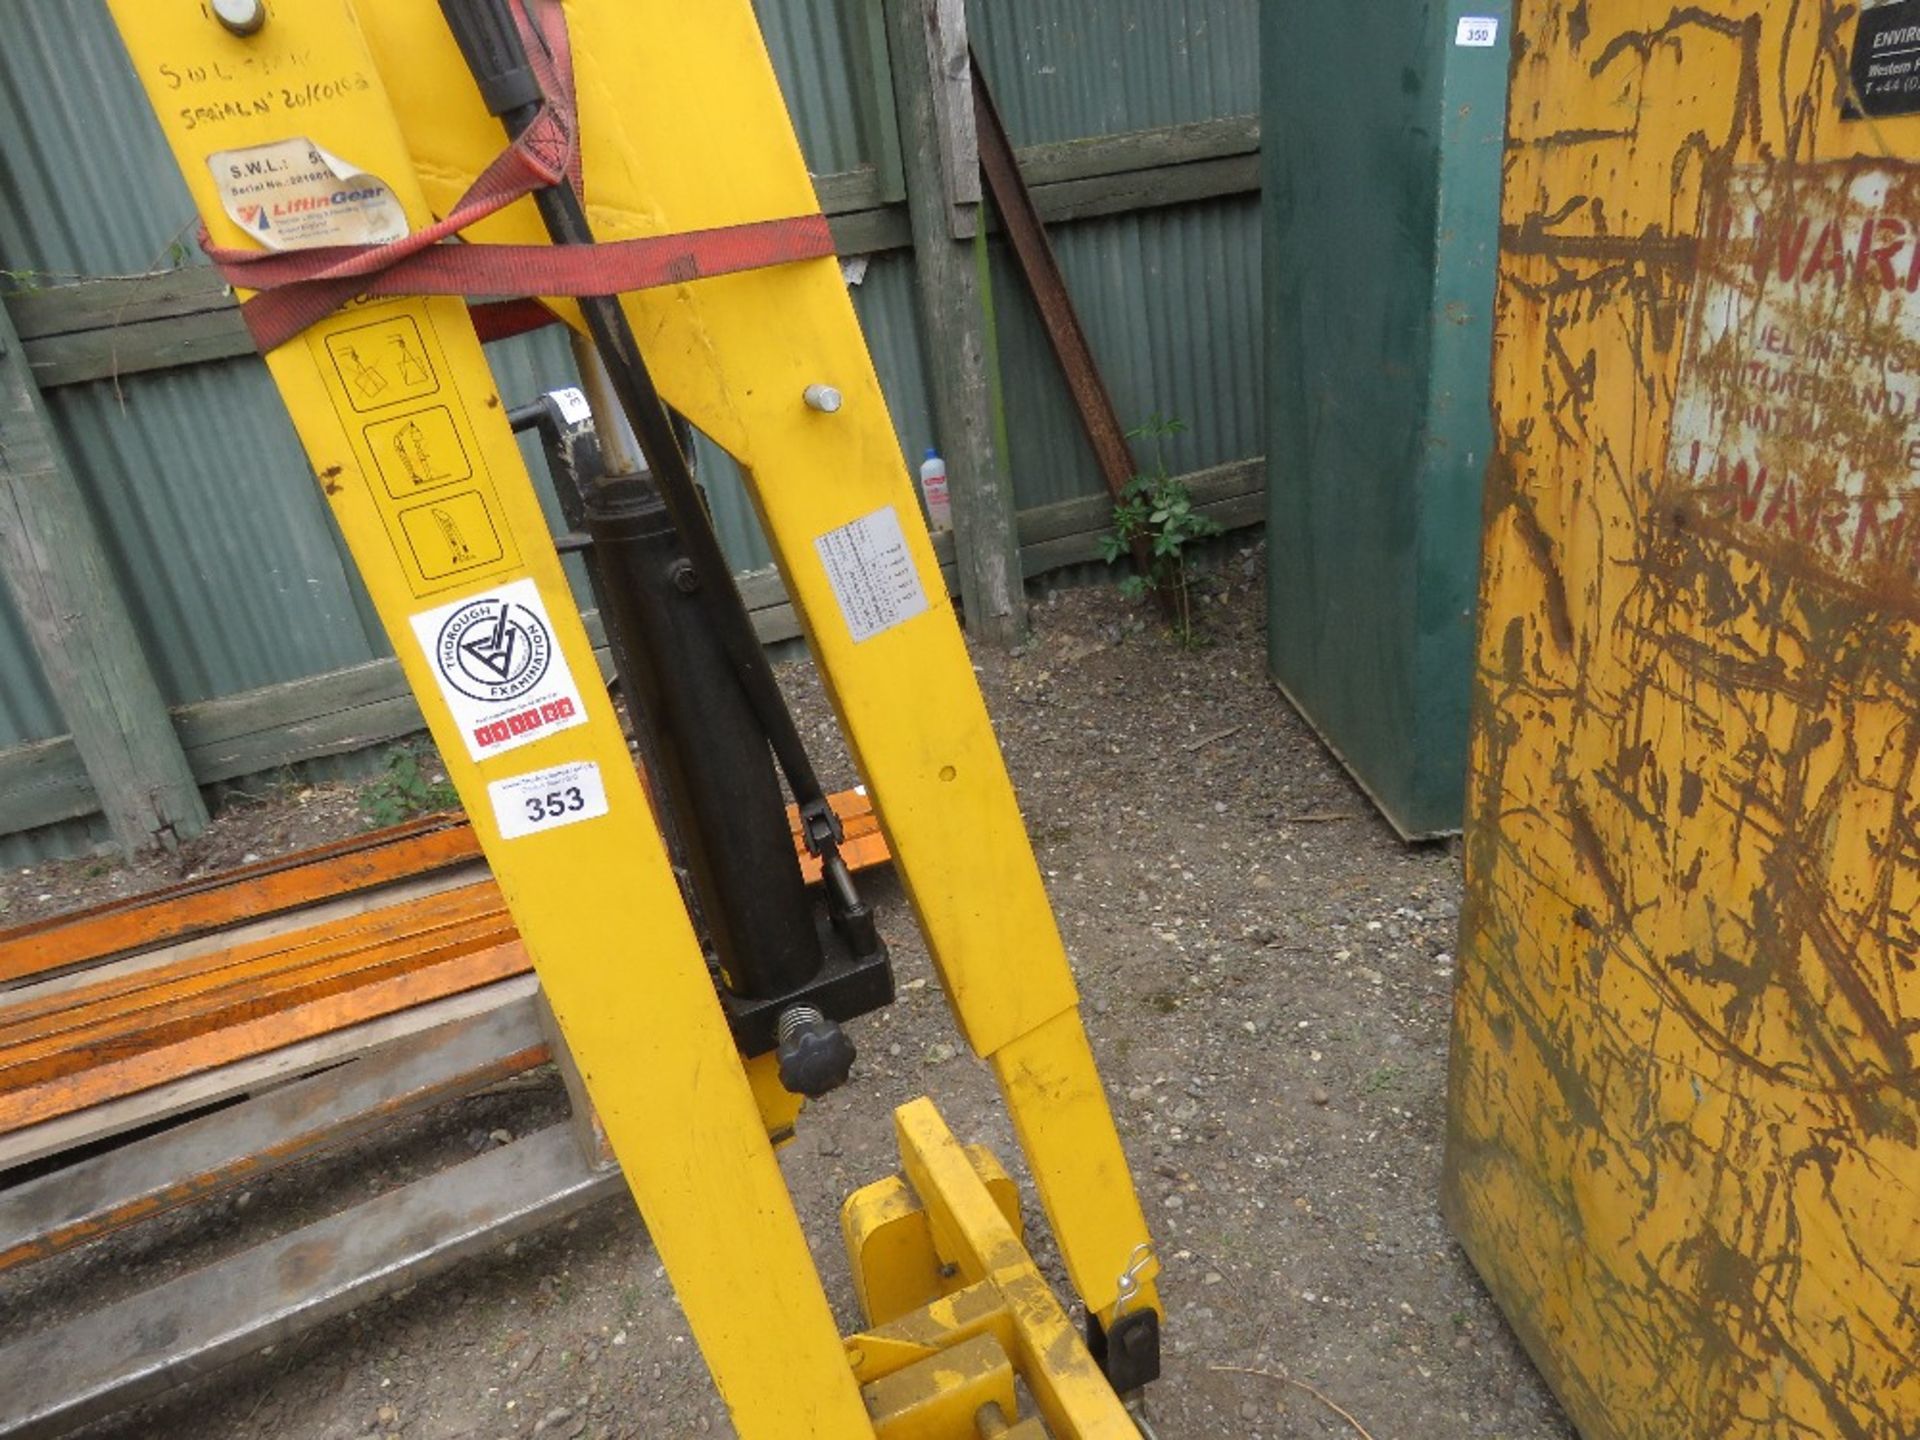 LIFTING GEAR HEAVY DUTY CANTILEVER WHEELED MANUAL CRANE / ENGINE CRANE UNIT, 550KG RATED. SOURCED FR - Image 2 of 5